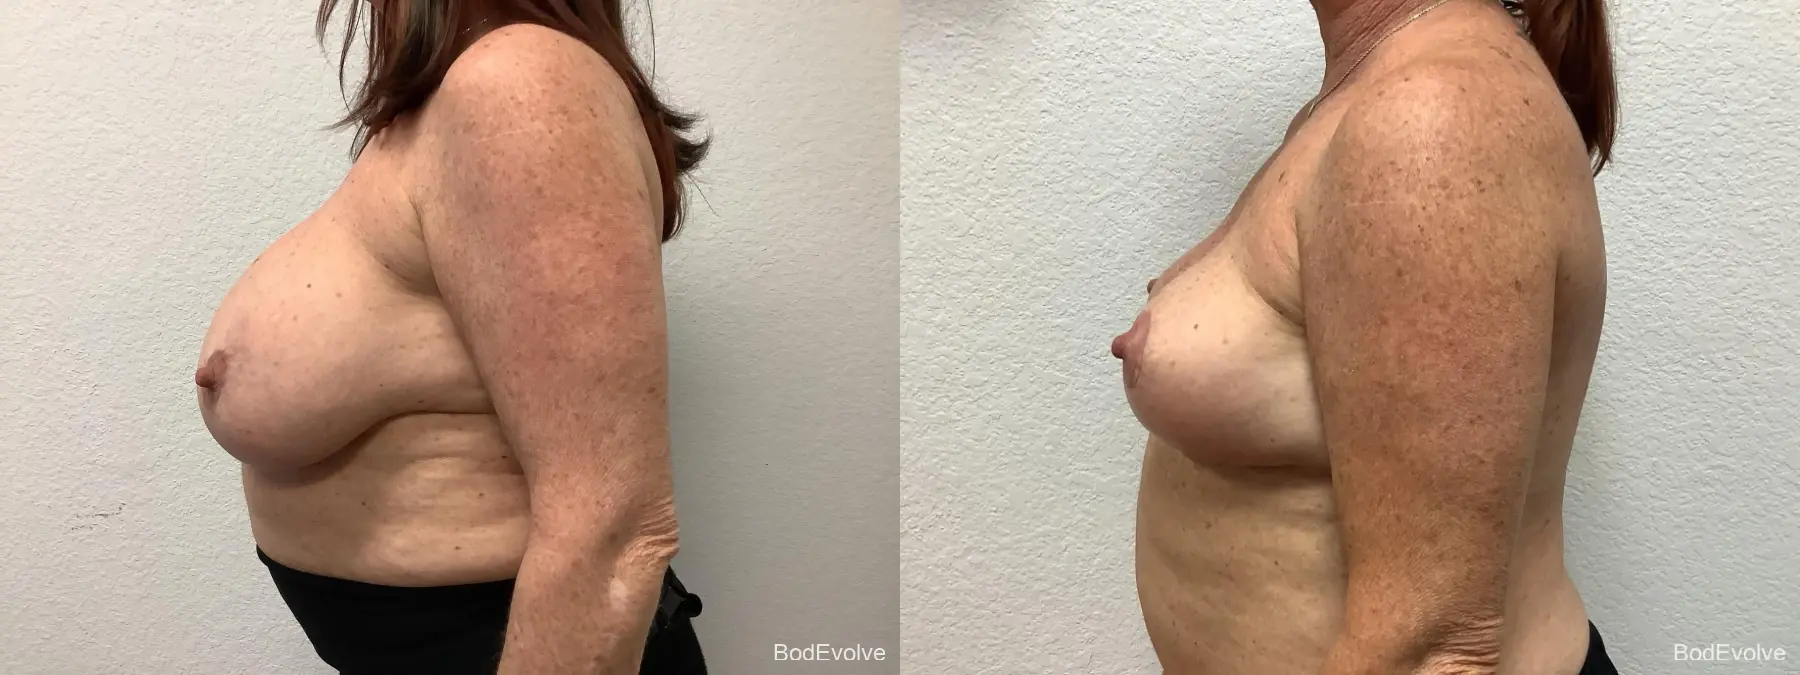 Breast Implant Removal With Lift: Patient 1 - Before and After 3